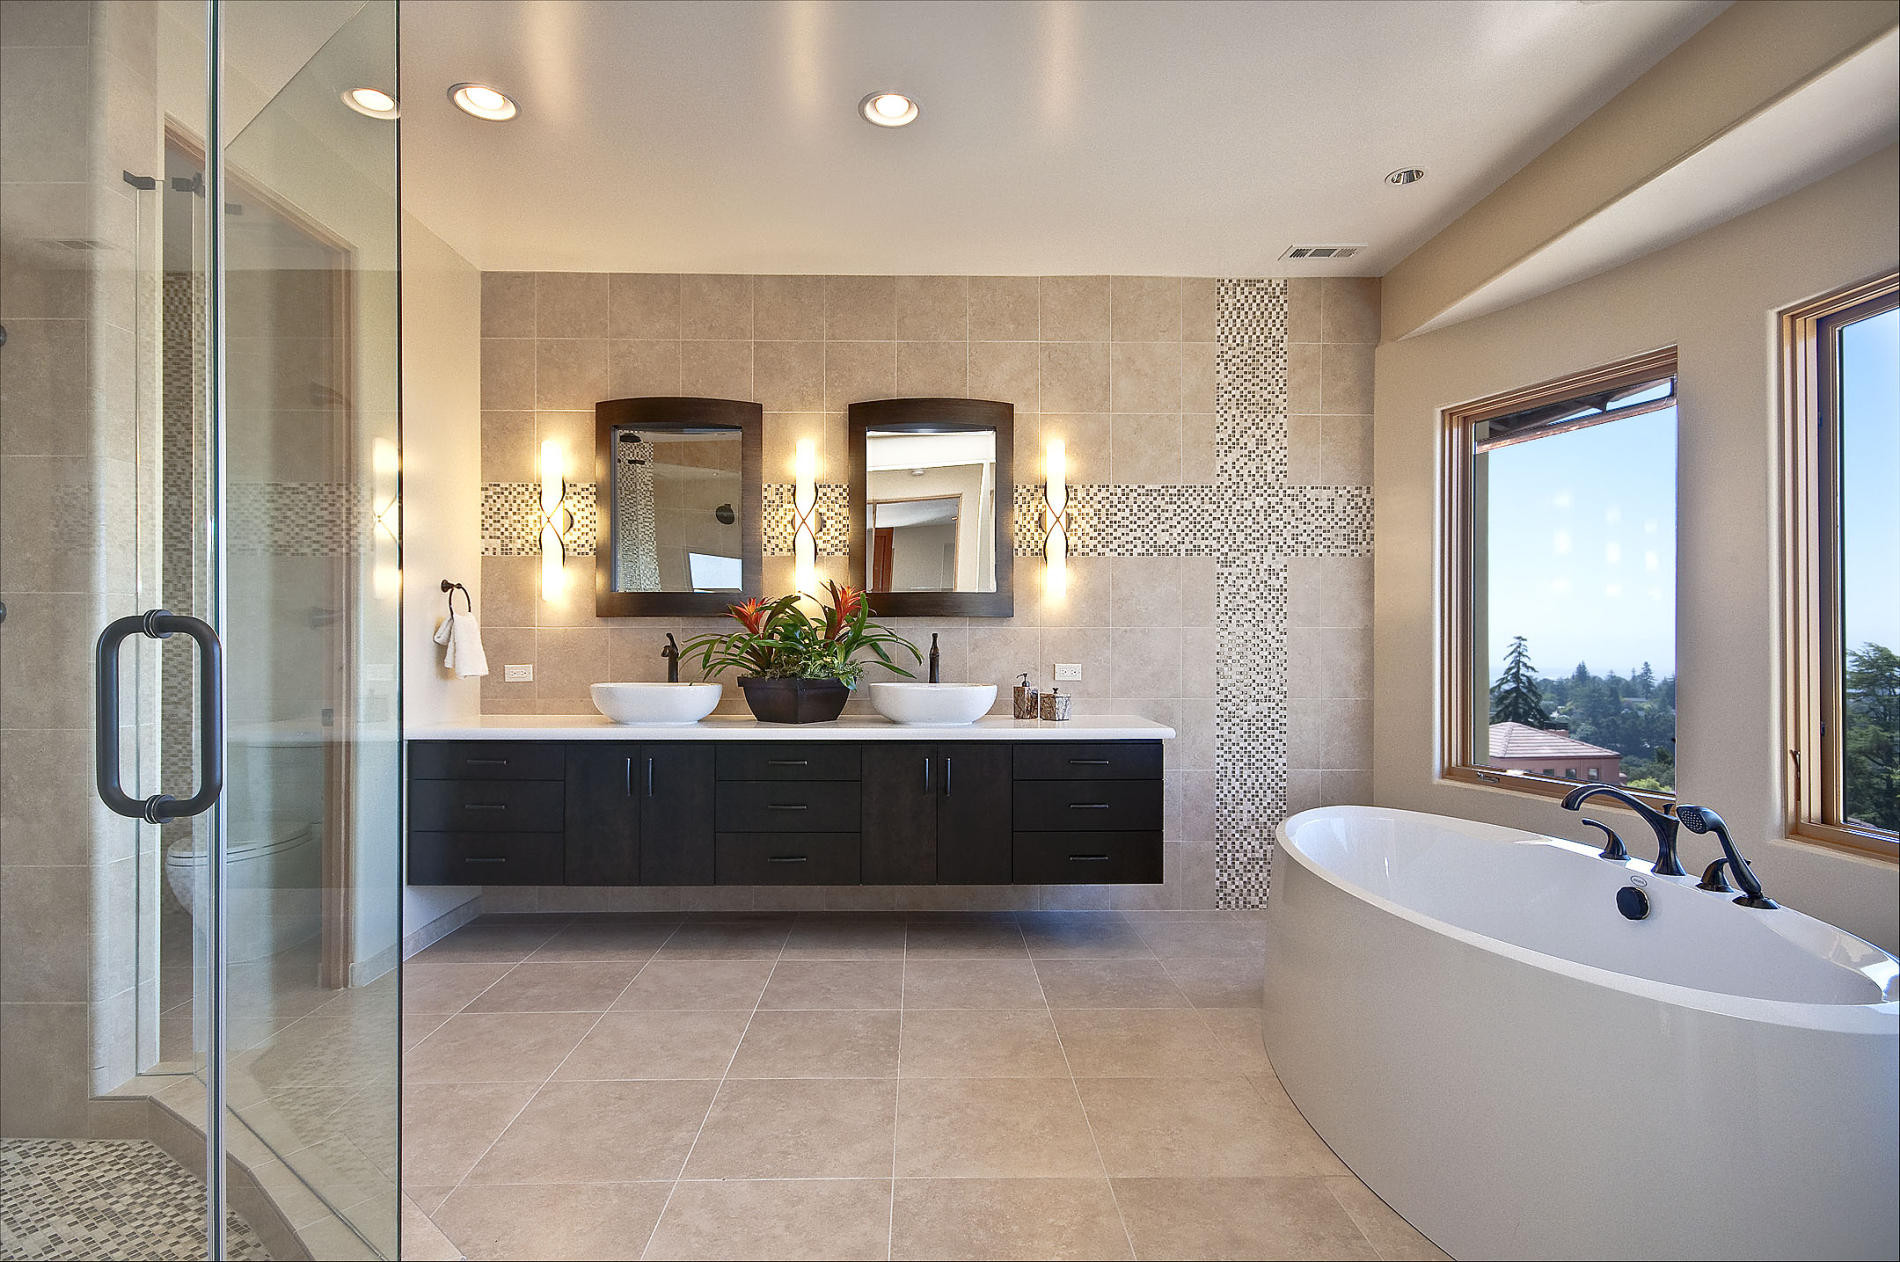 Master Bathroom Layout
 Why You Should Planning Master Bathroom Layouts MidCityEast